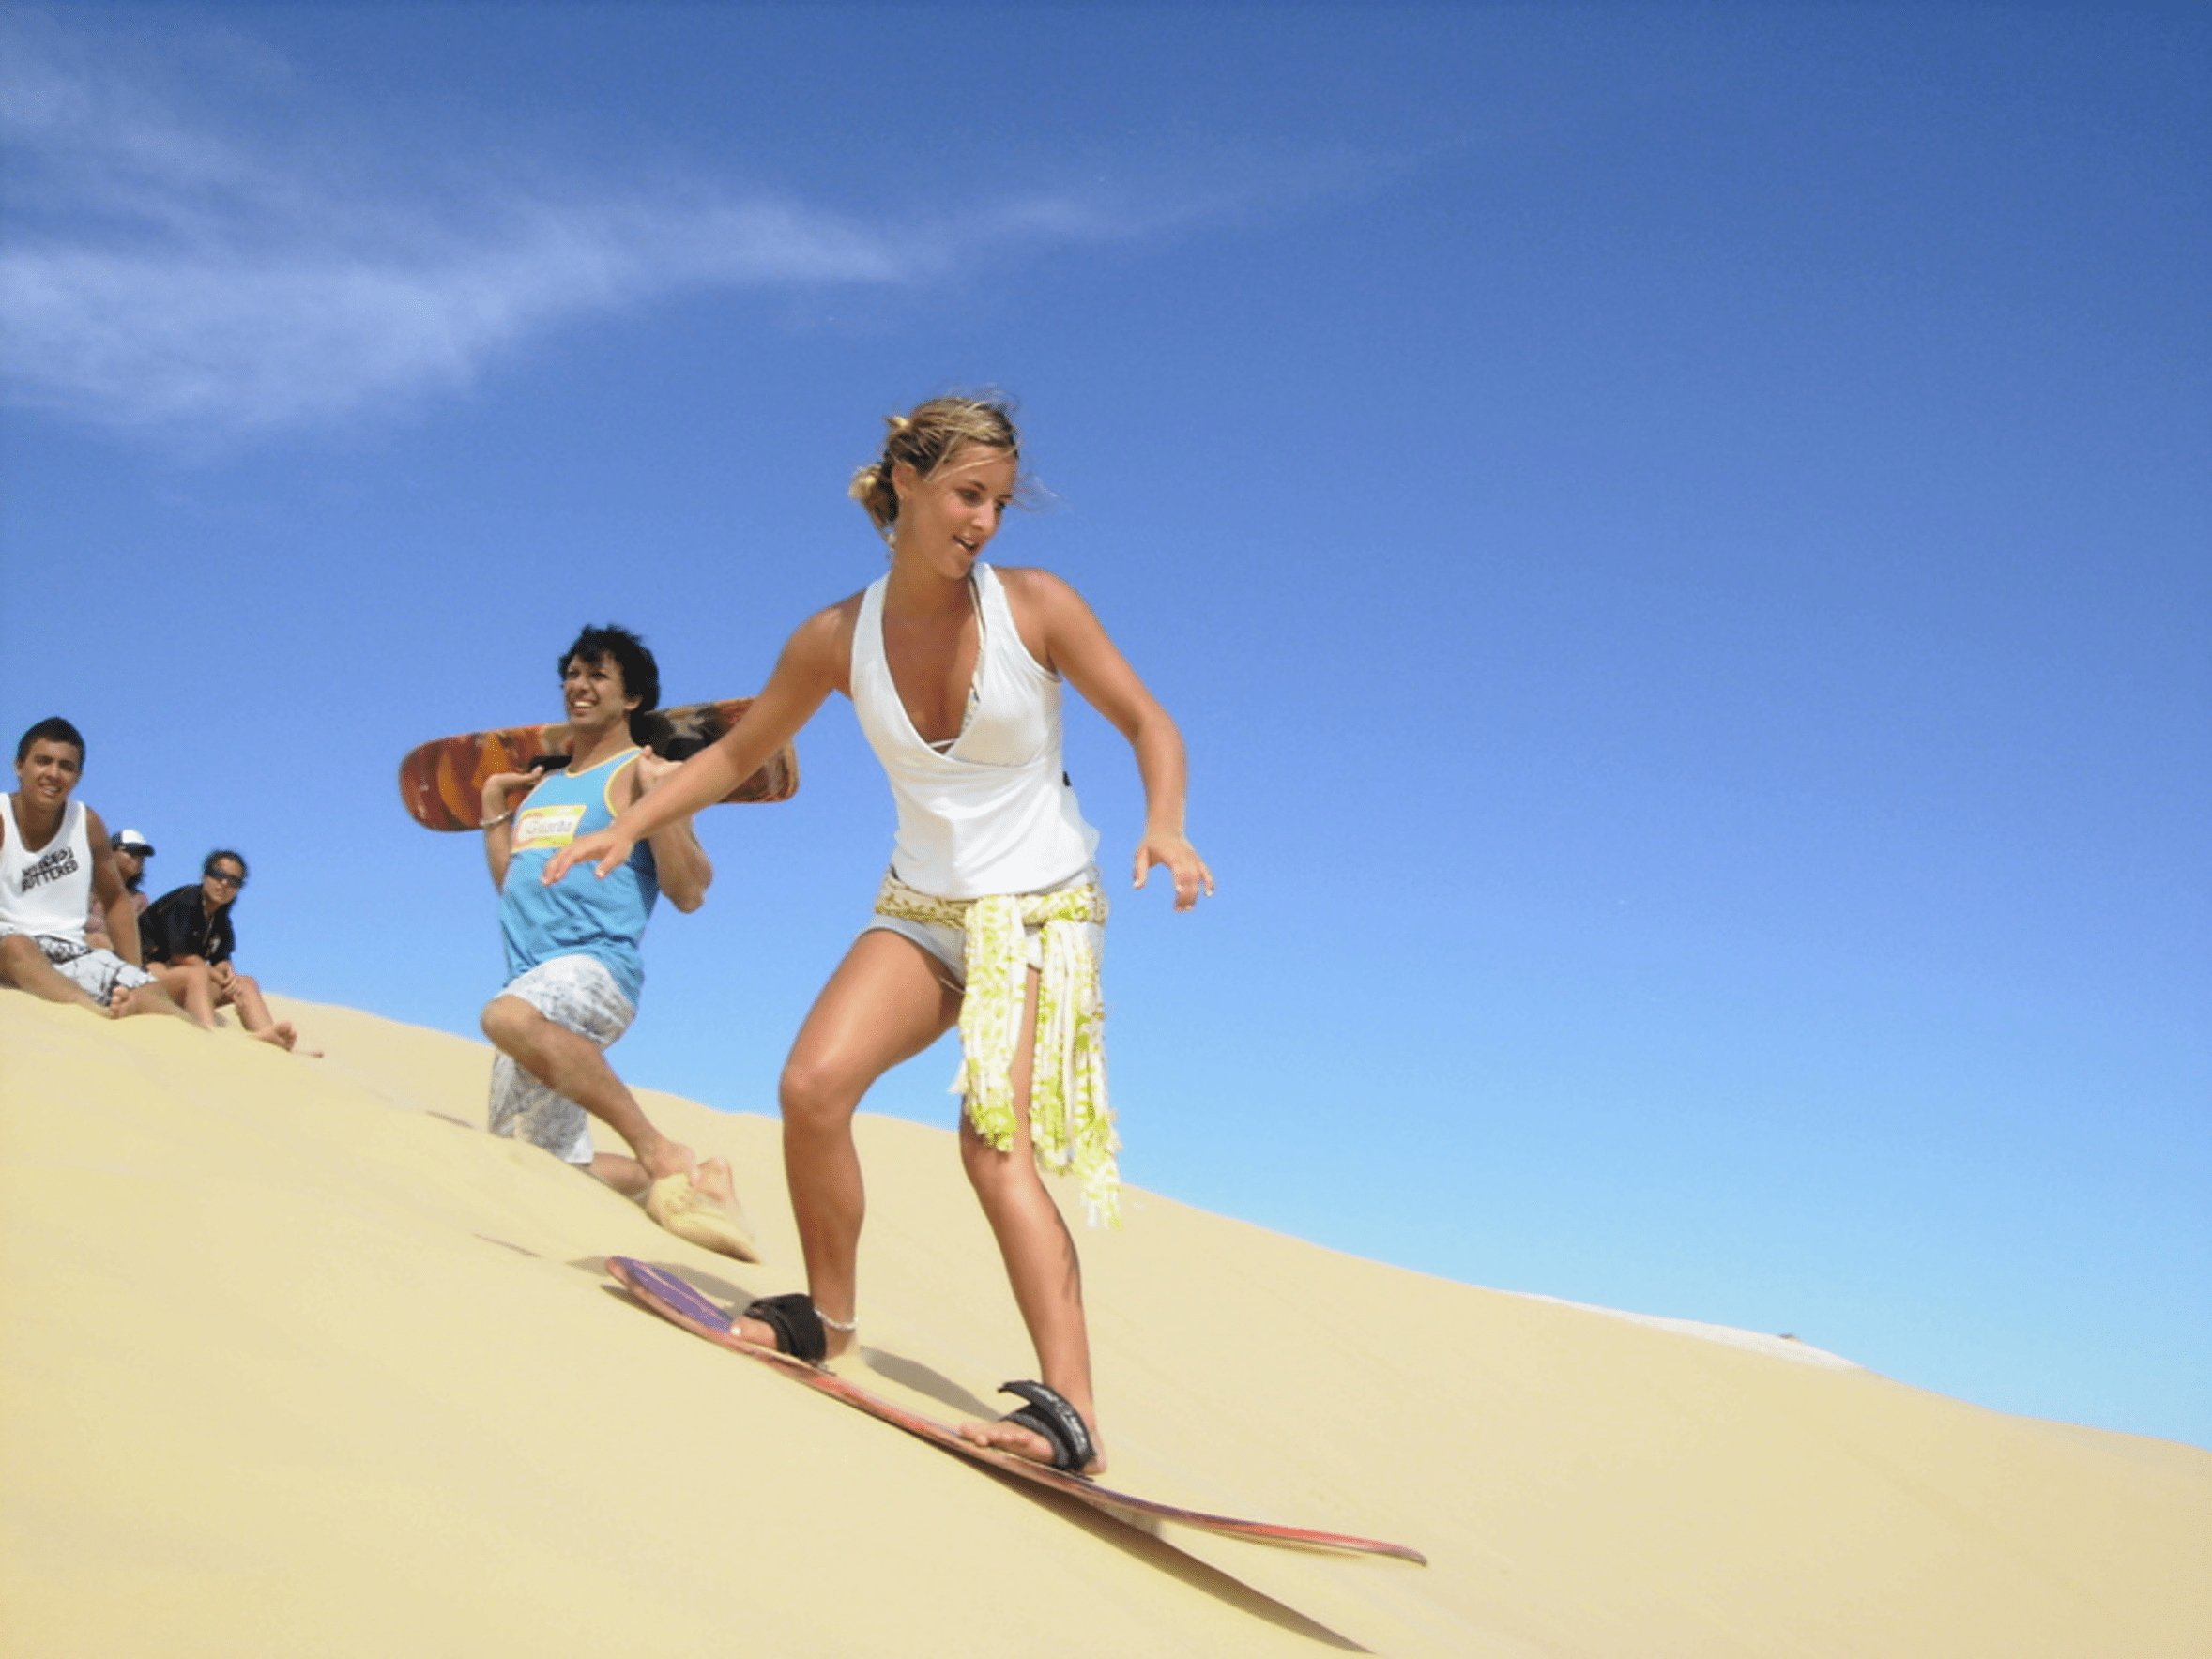 Woman sand surfing